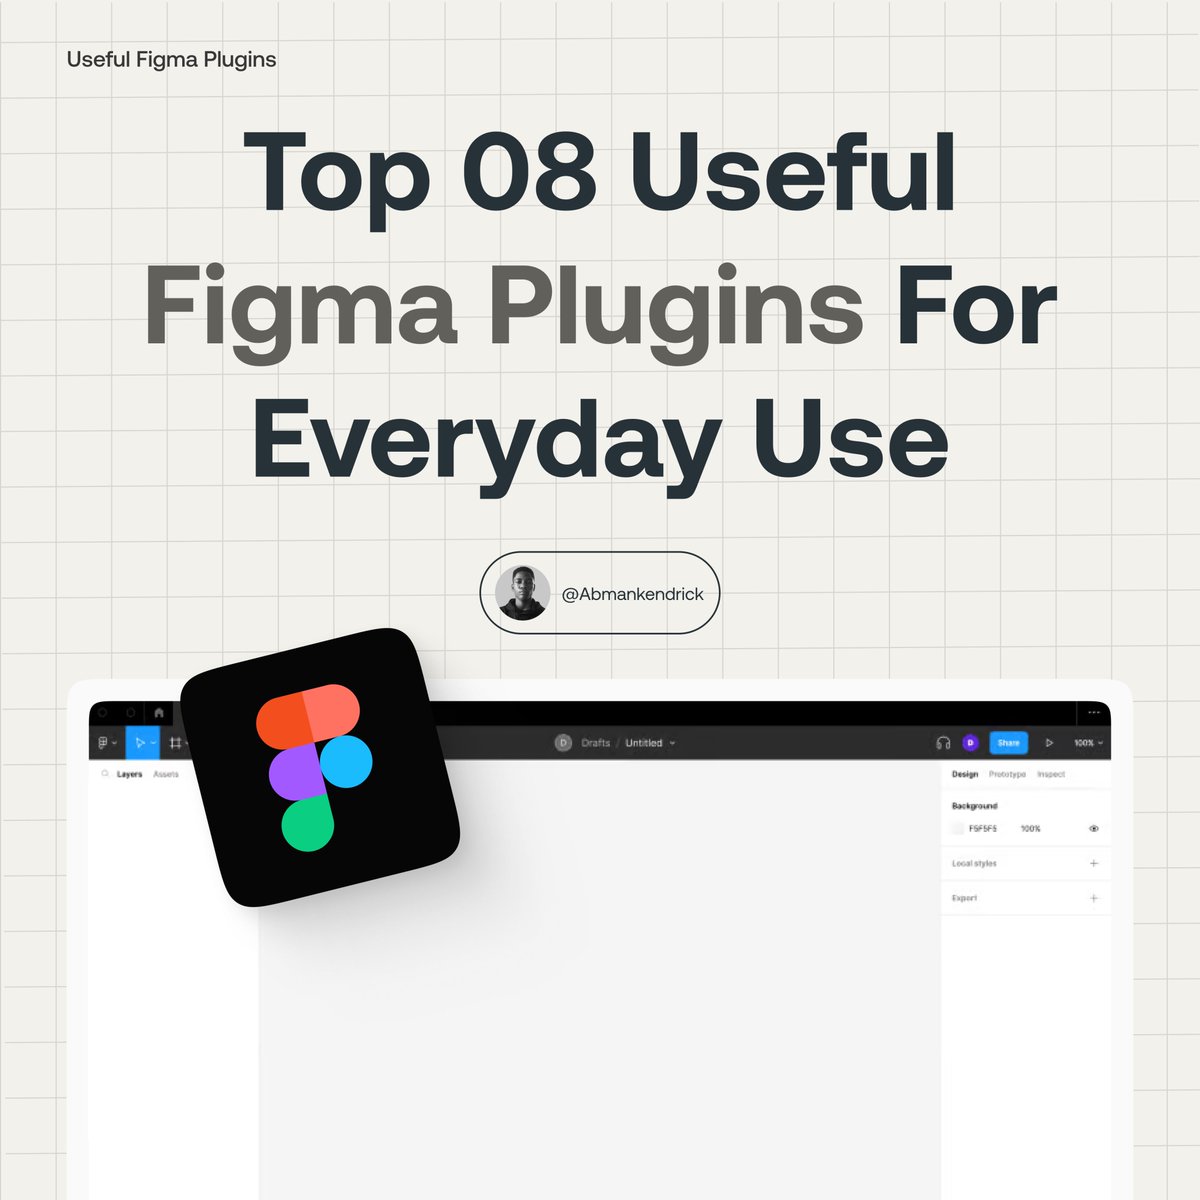 UI/UX Designers, I recently discovered these 08 useful Figma plugins that will help you speed up your workflow 10X faster when designing your next UI design project.

Bookmark it for later 💜